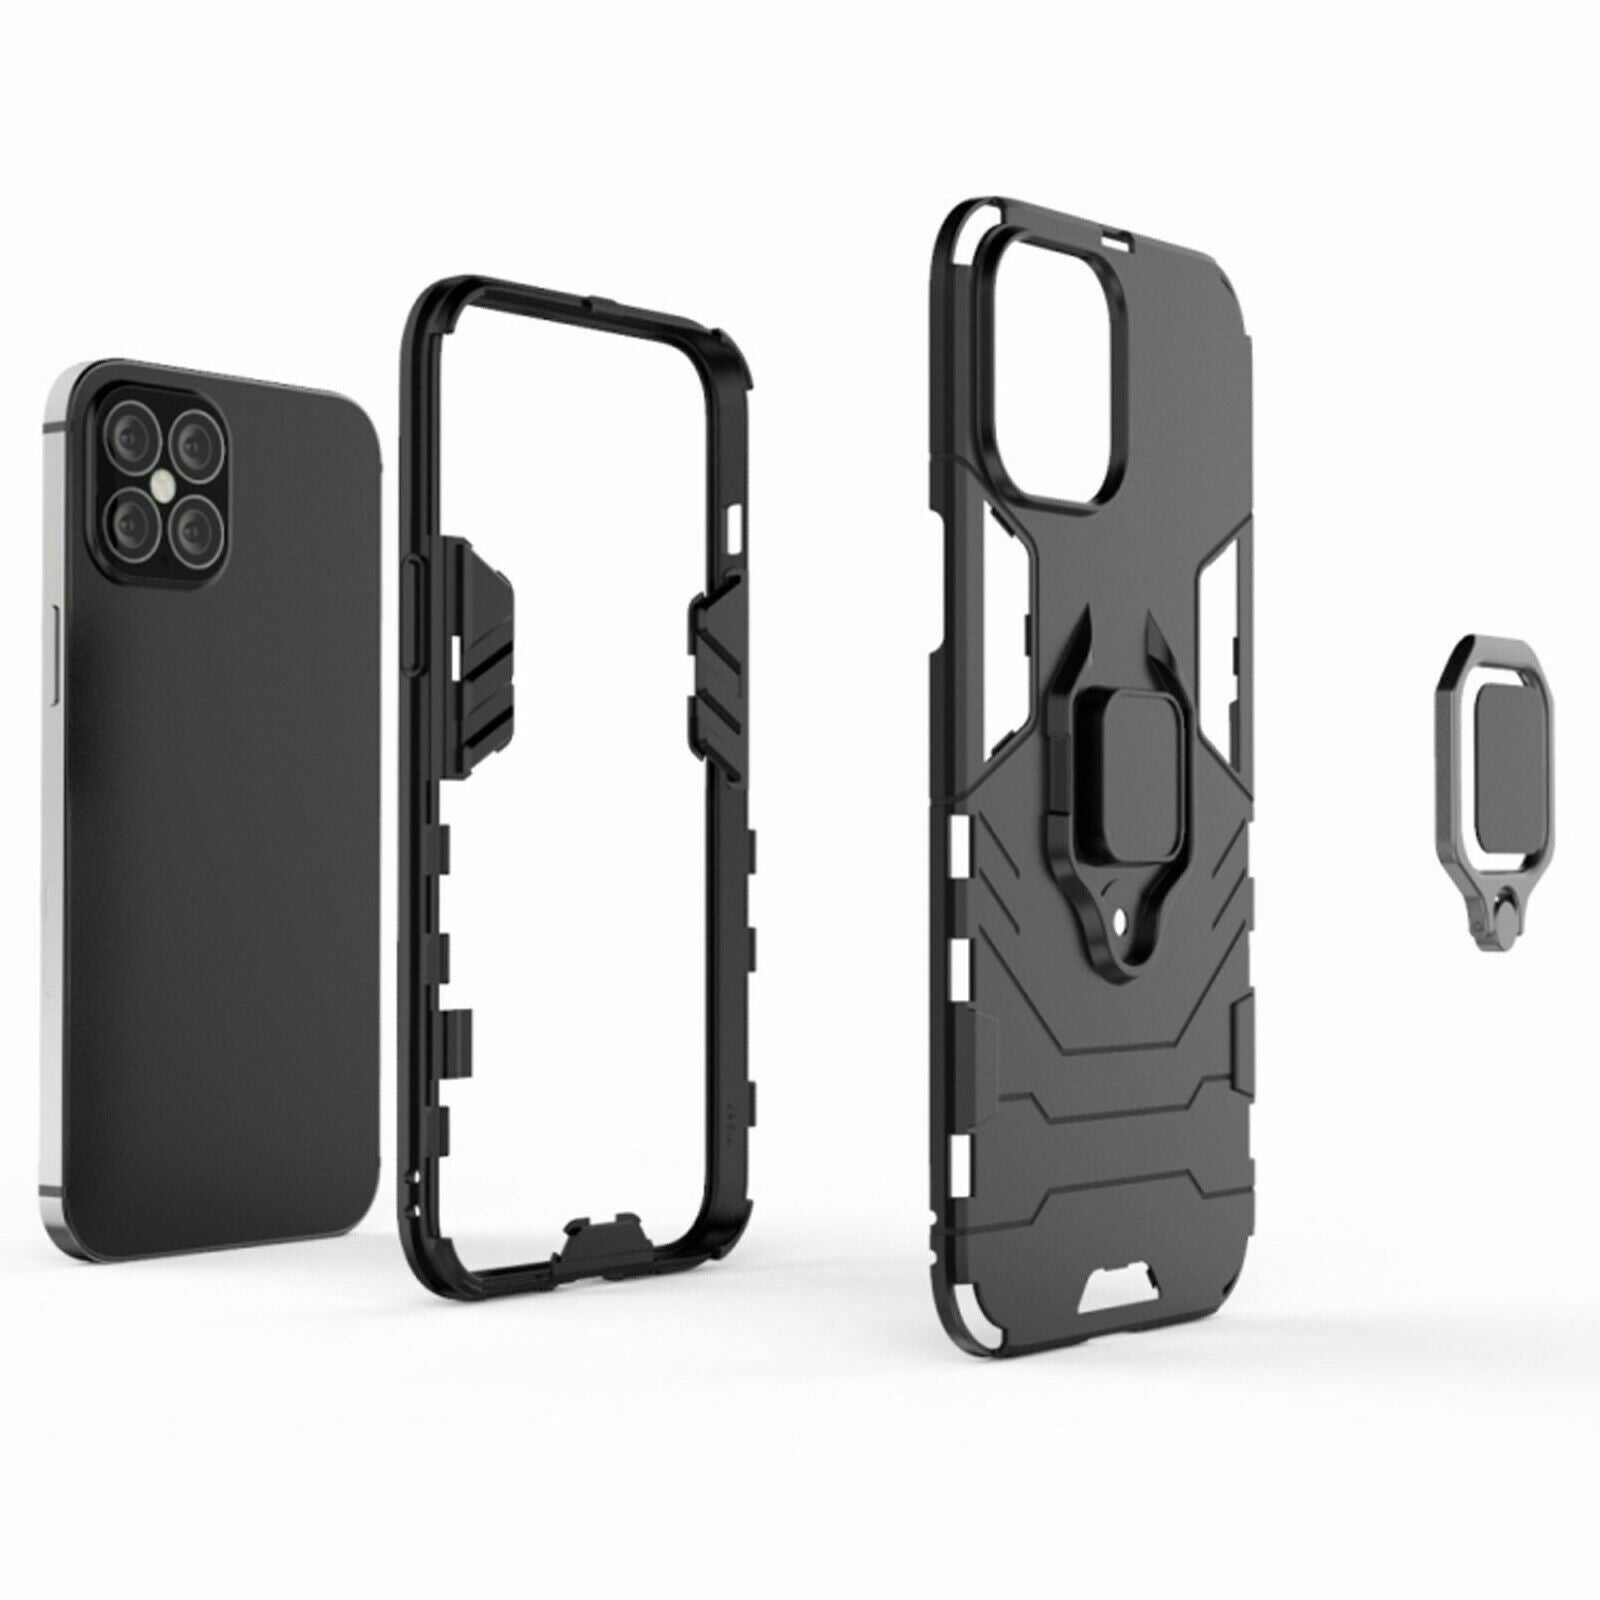 Shockproof Rugged 360 Ring Stand Armor Cover iPhone 12 Pro Max 6.7”